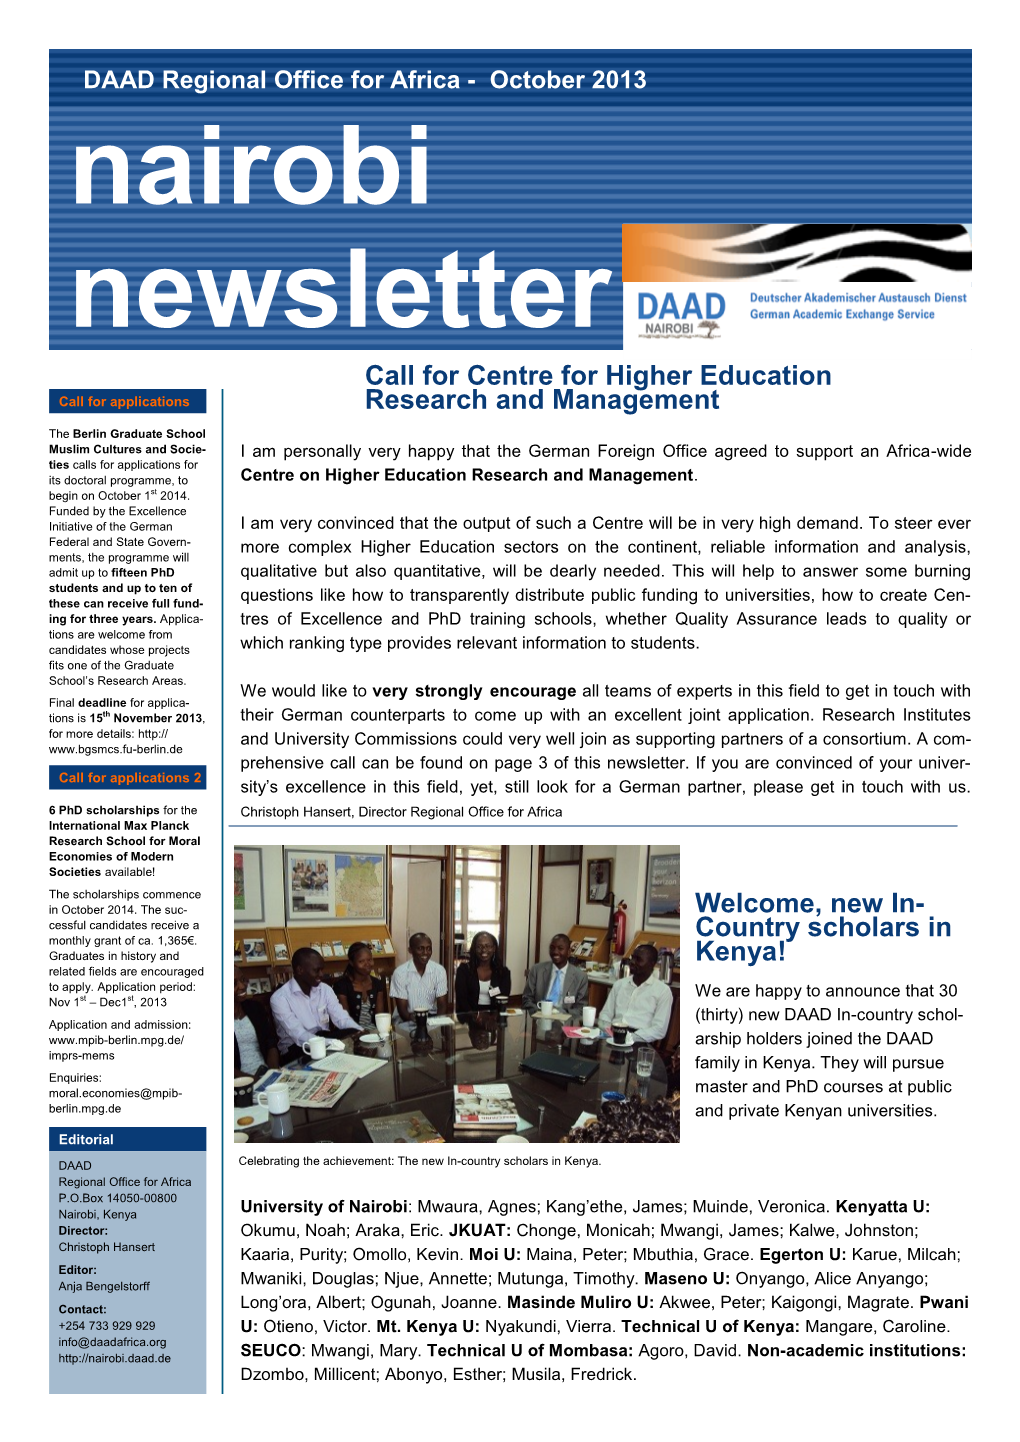 Nairobi Newsletter Call for Centre for Higher Education Call for Applications Research and Management